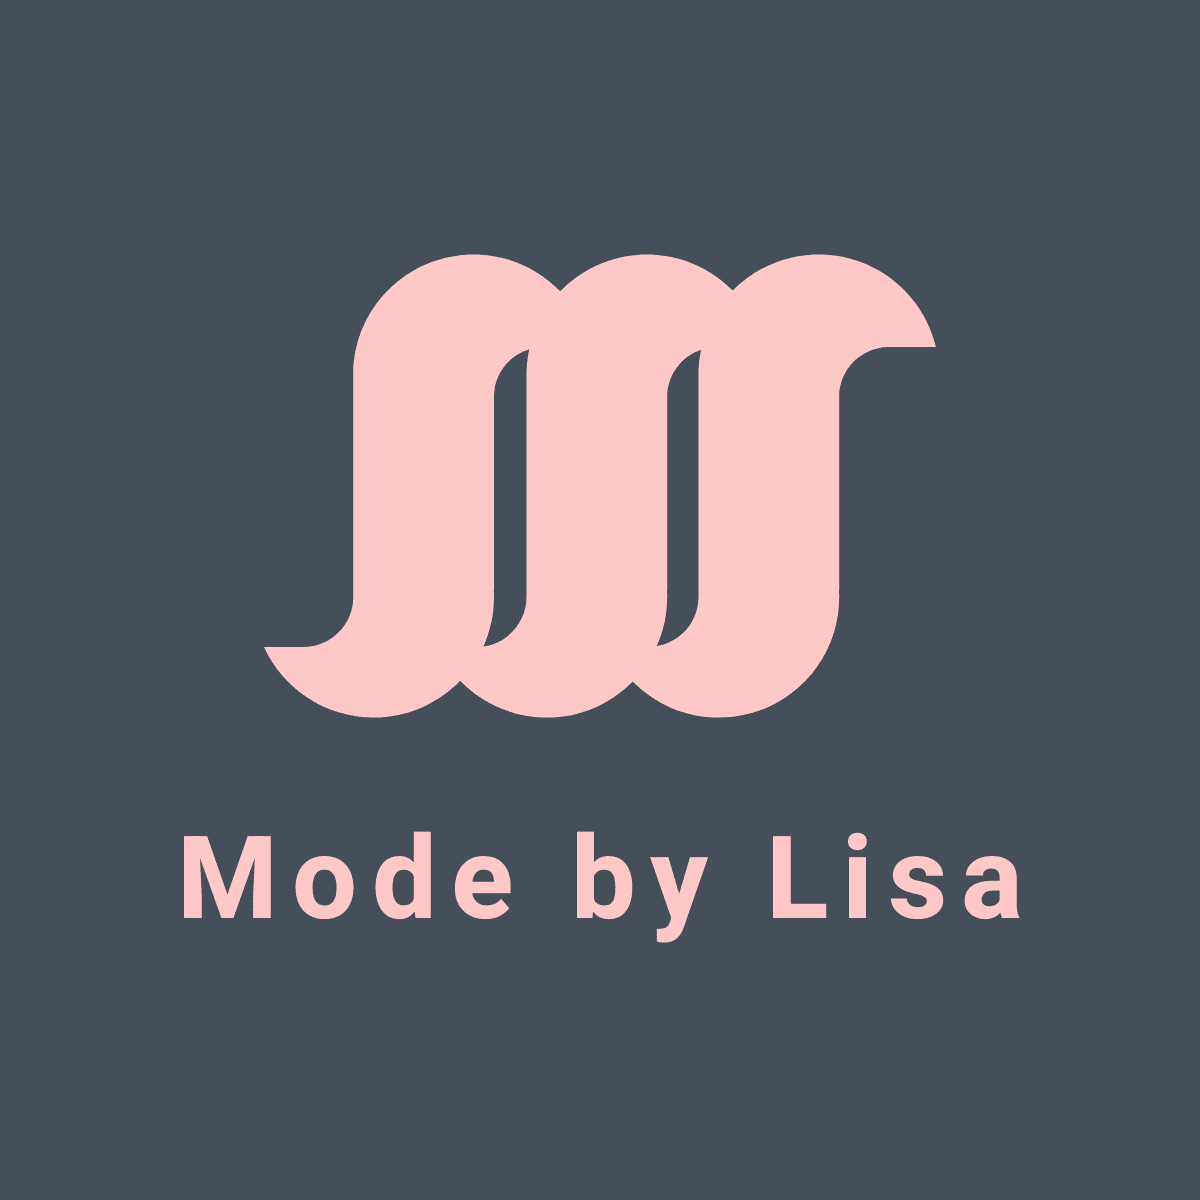 Mode by Lisa